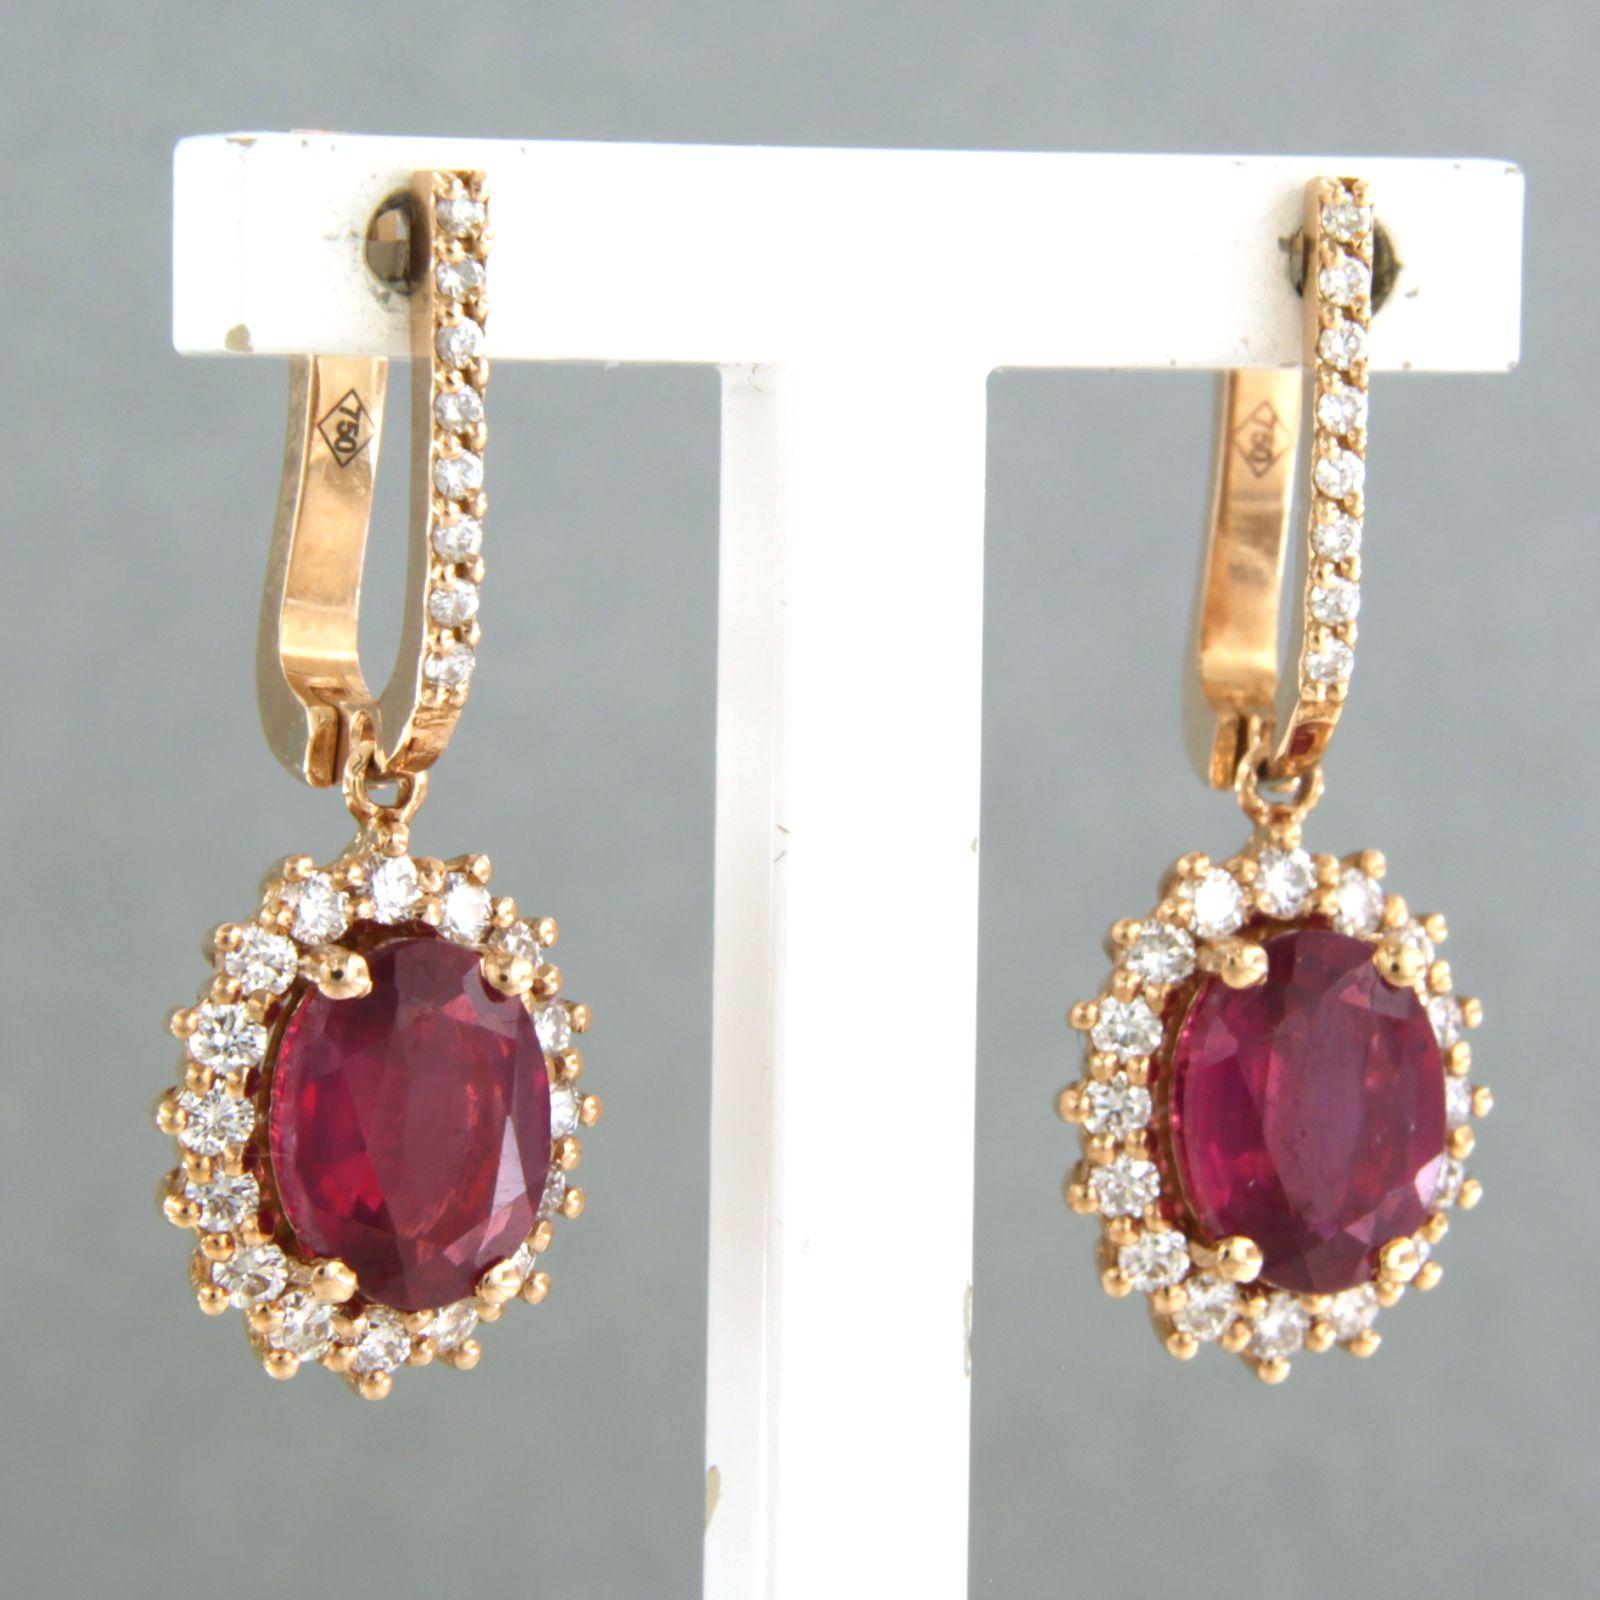 18k pink gold earrings set with ruby 3.20 ct and brilliant cut diamond 0.64ct - F/G - VS/SI

detailed description:

the size of the earrings is 2.6 cm high and 1.1 cm wide

Total weight 6.2 grams

set with

- 2 x 8.0 mm x 6.0 mm oval facet cut